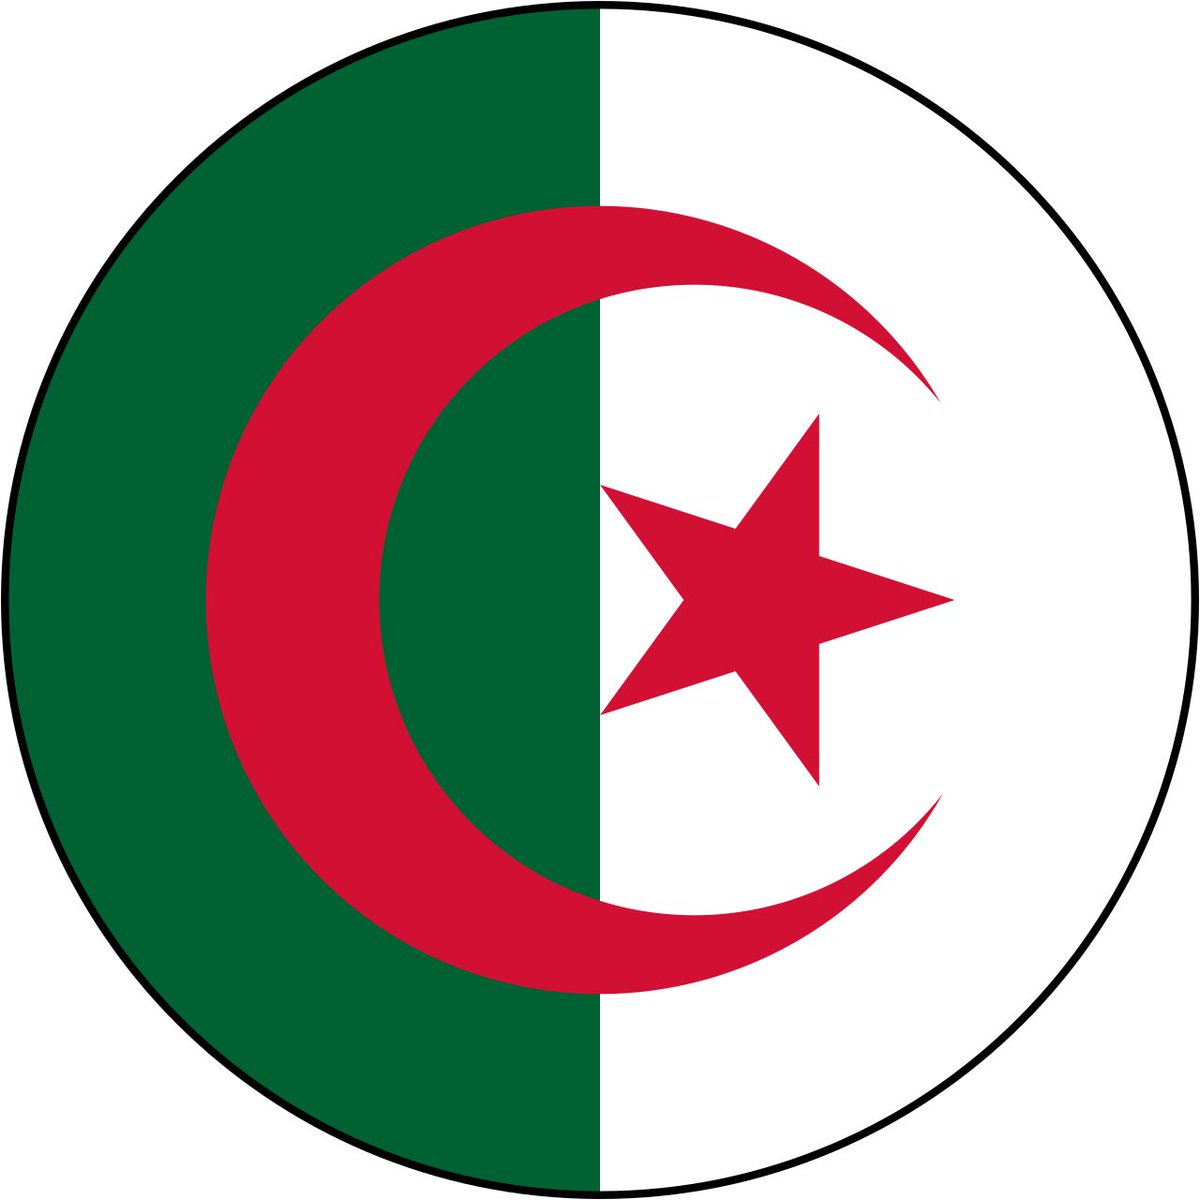 Algeria: that’s just your flag in a circle